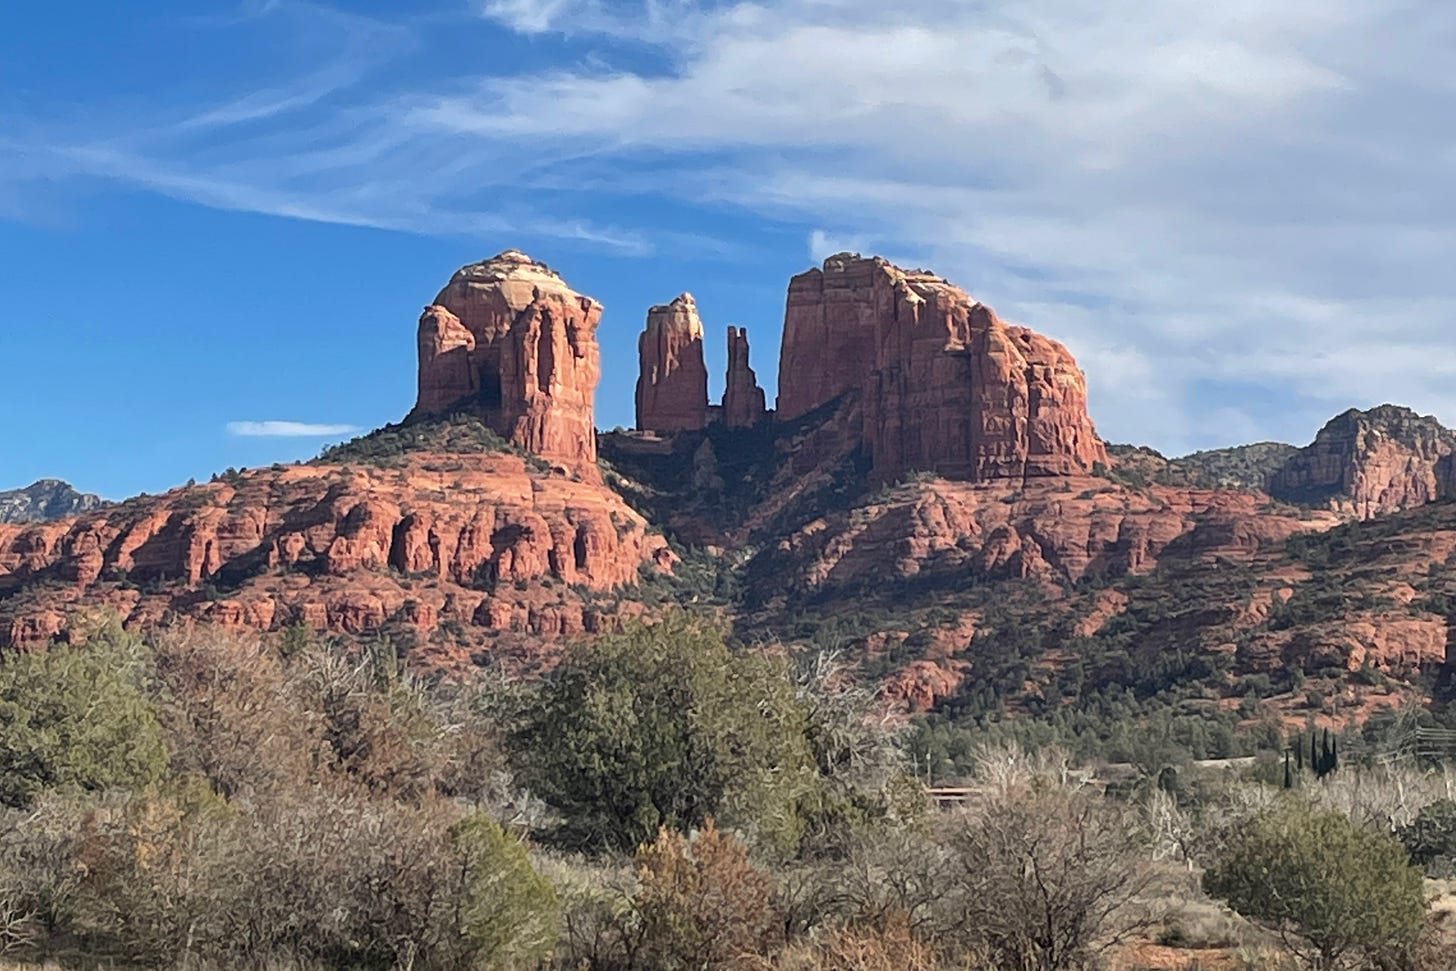 Red rock formation called Cathedral Rock in Sedona Arizona